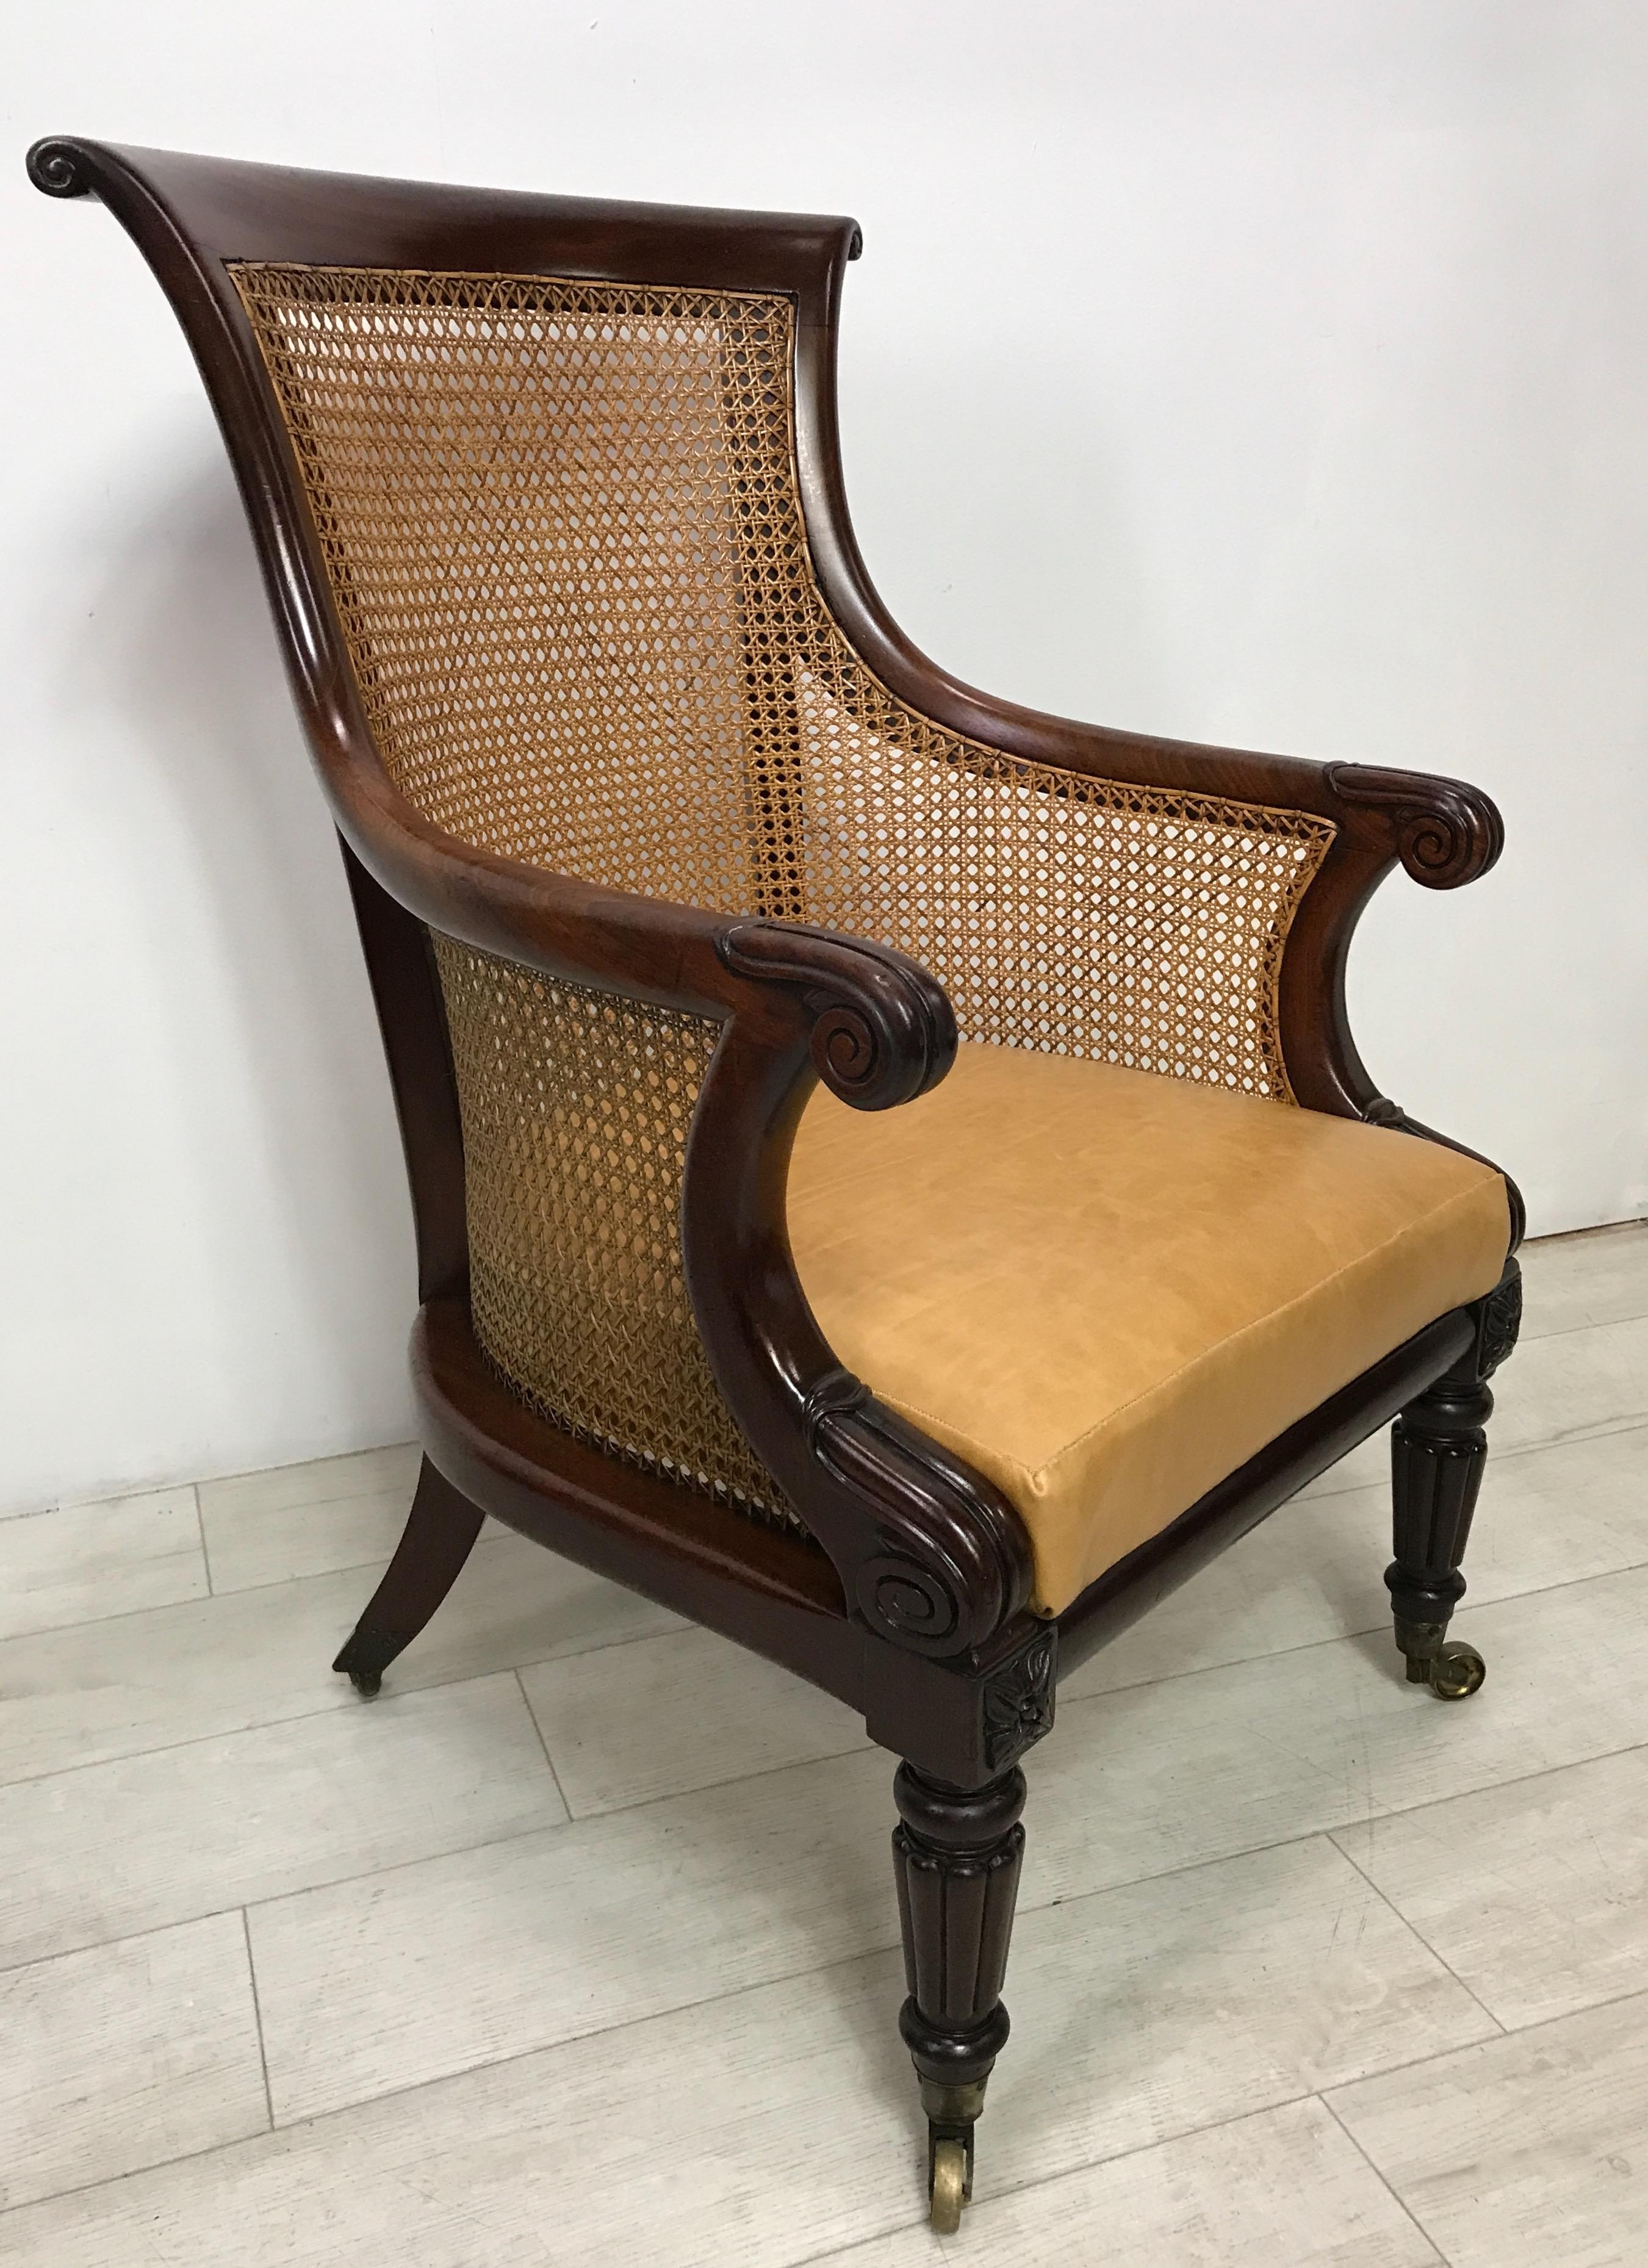 Carved English Regency Period Mahogany and Caned Library Armchair, Early 19th Century